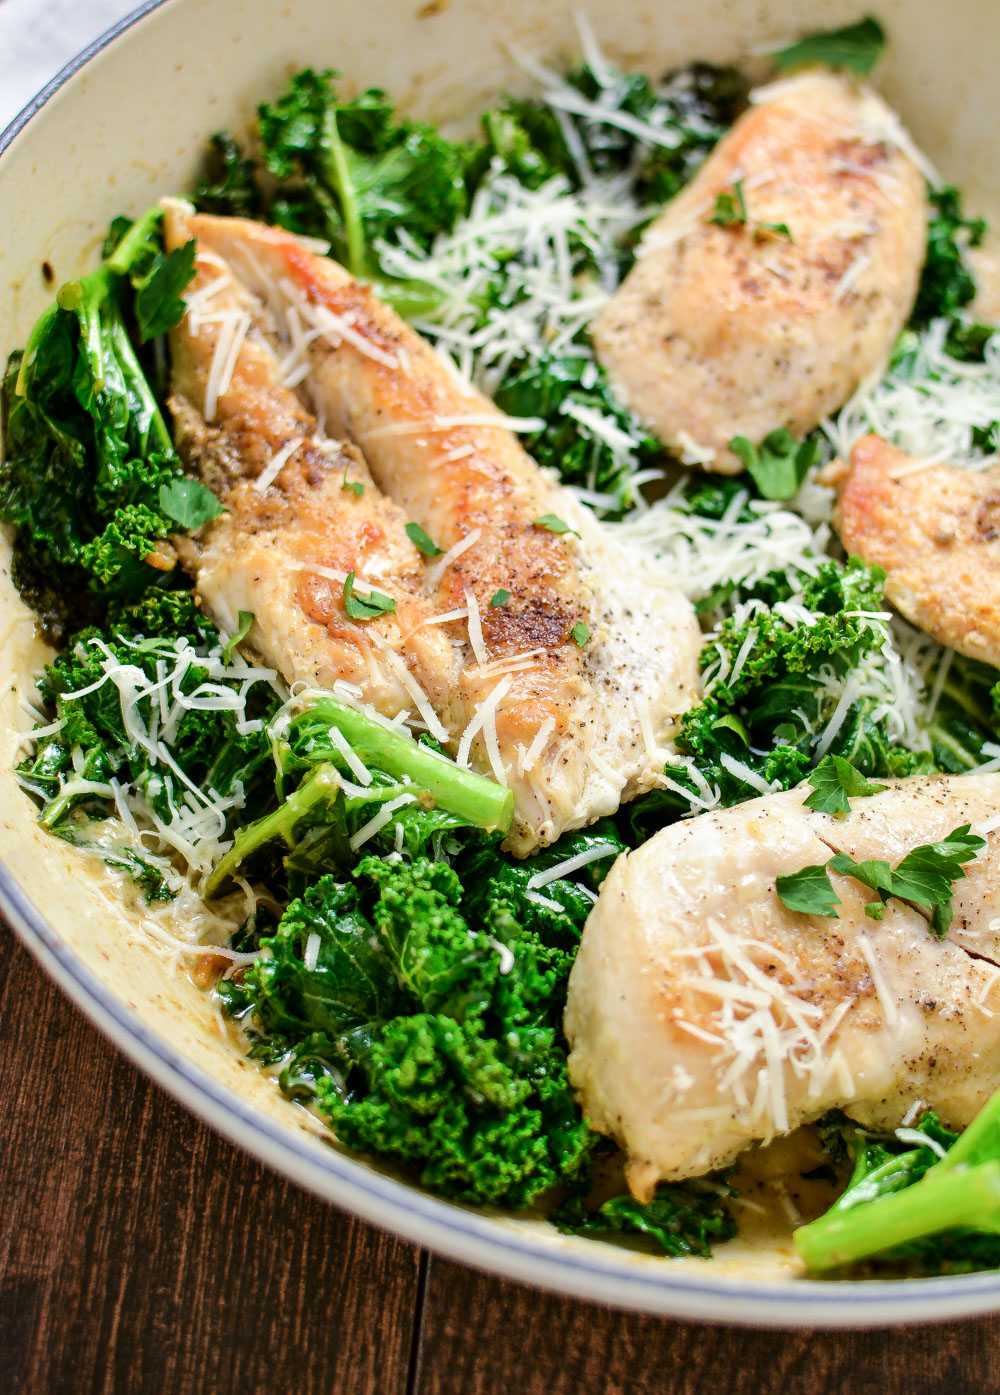 Skillet Chicken Caesar Salad is a fun twist on a classic recipe that's flavorful and full of texture!